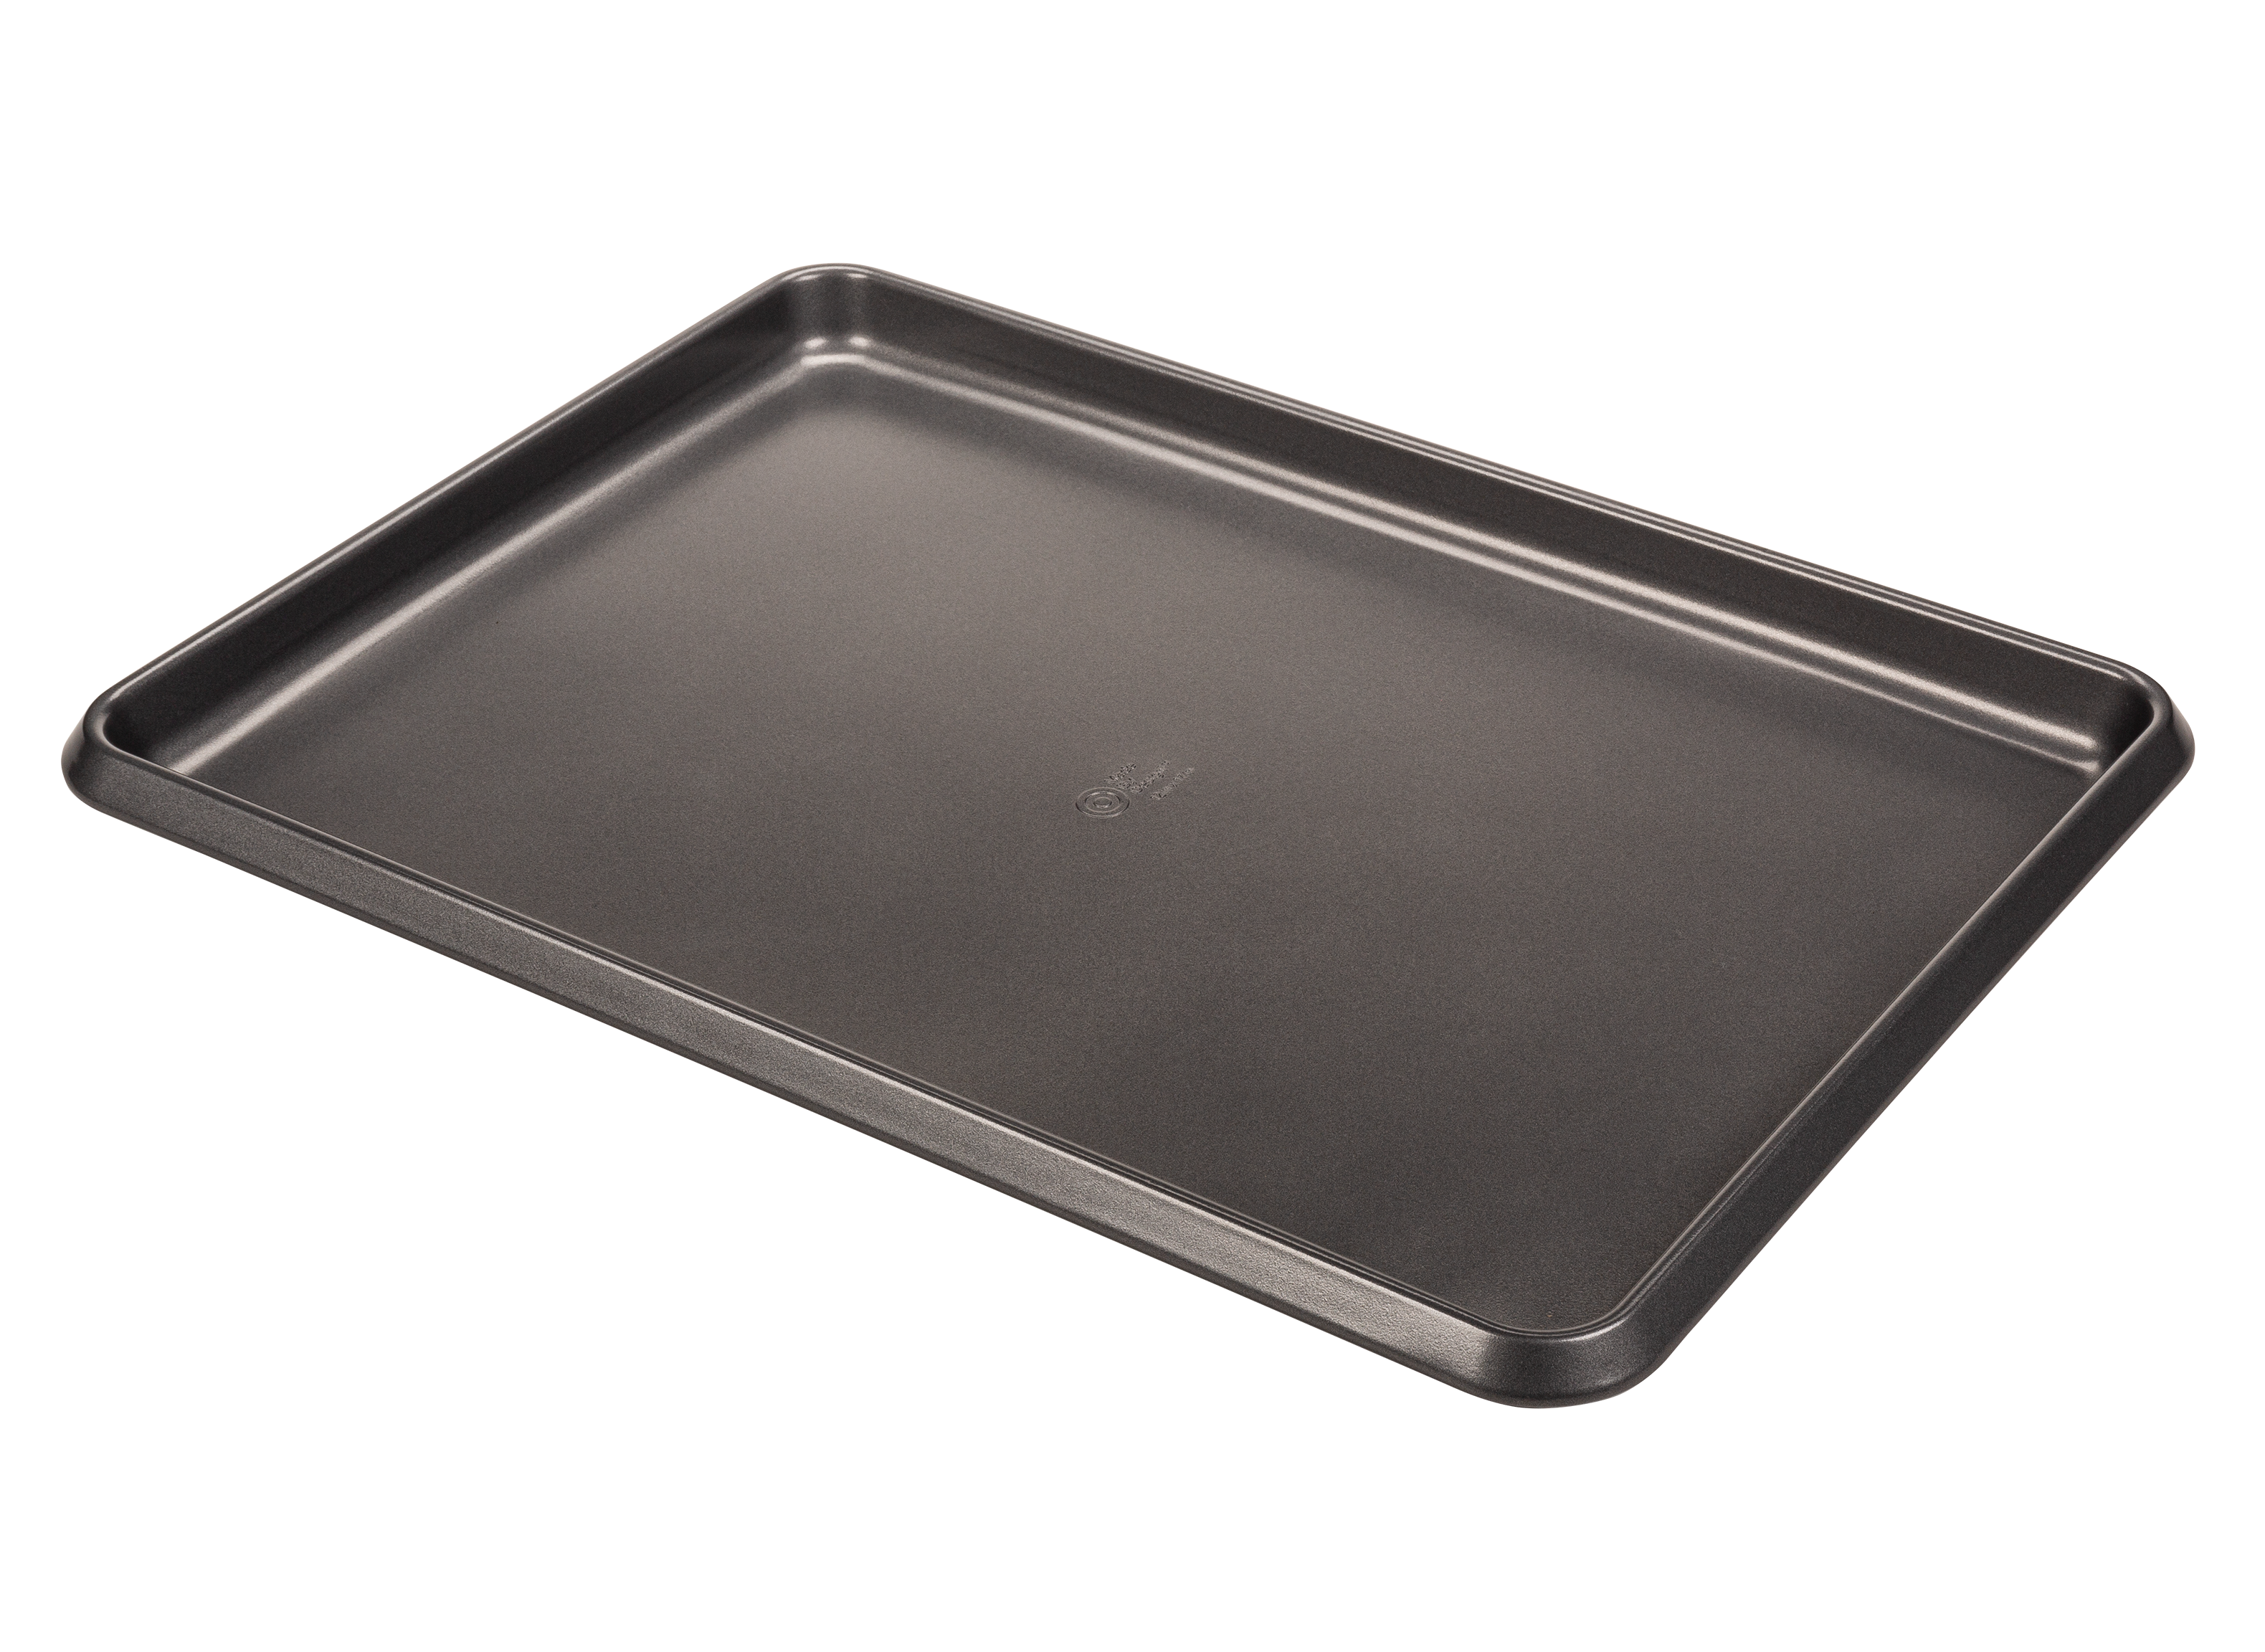 12 x 17 Non-Stick Jumbo Cookie Sheet Carbon Steel tray pan - Made By  Design